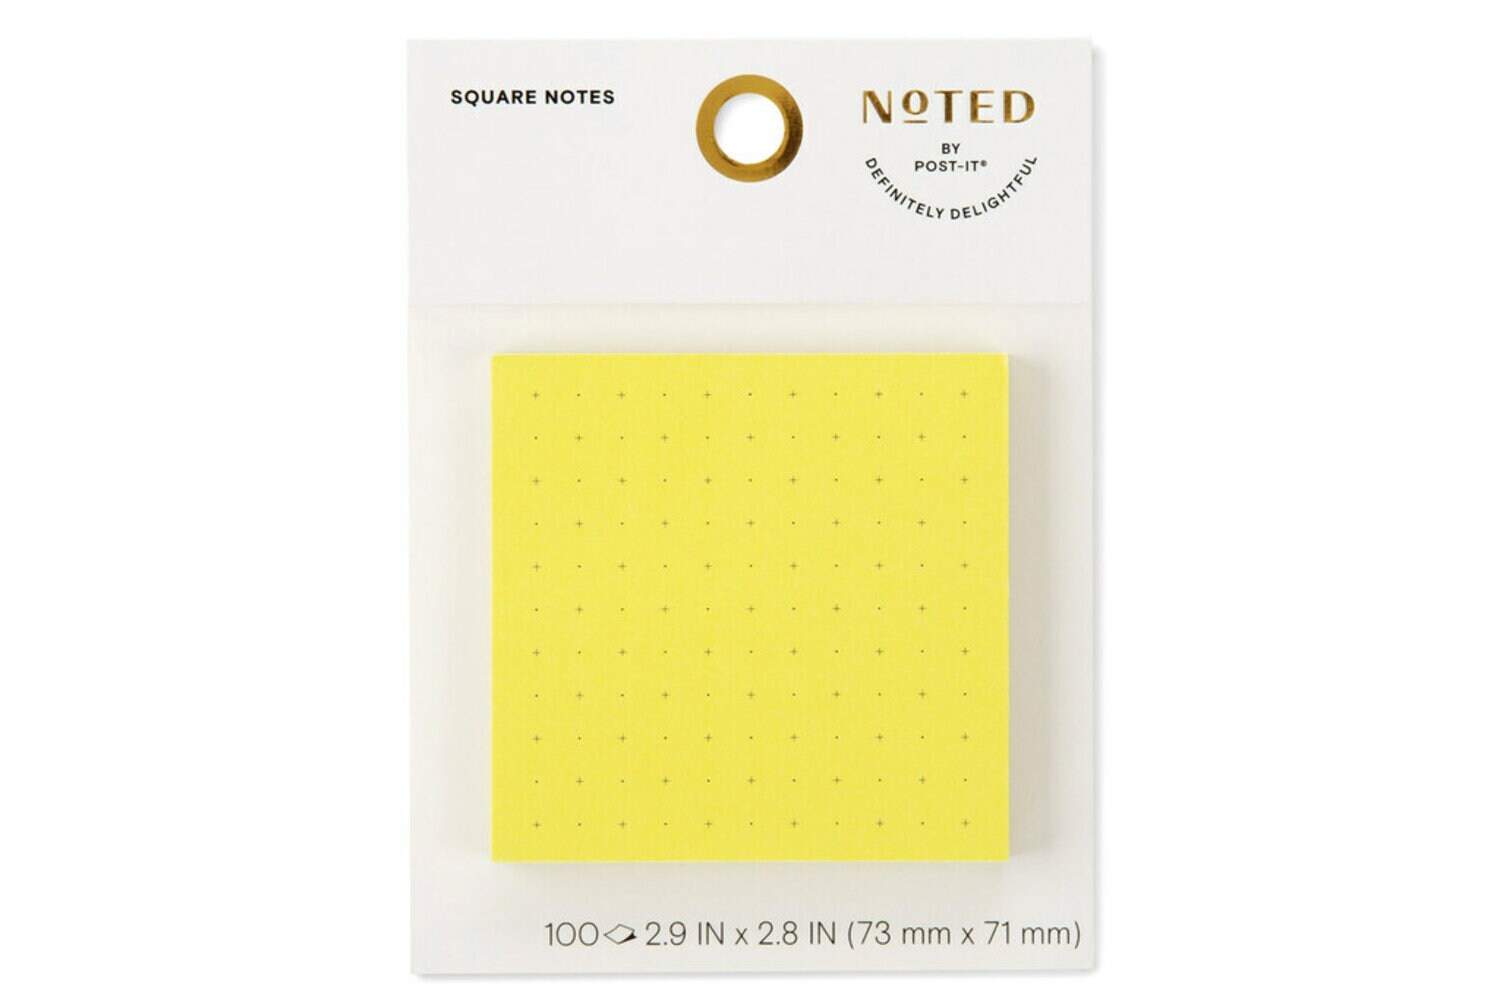 7100256501 - Post-it Printed Notes NTD-33-DOT, 2.9 in x 2.8 in (73 mm x 71 mm)